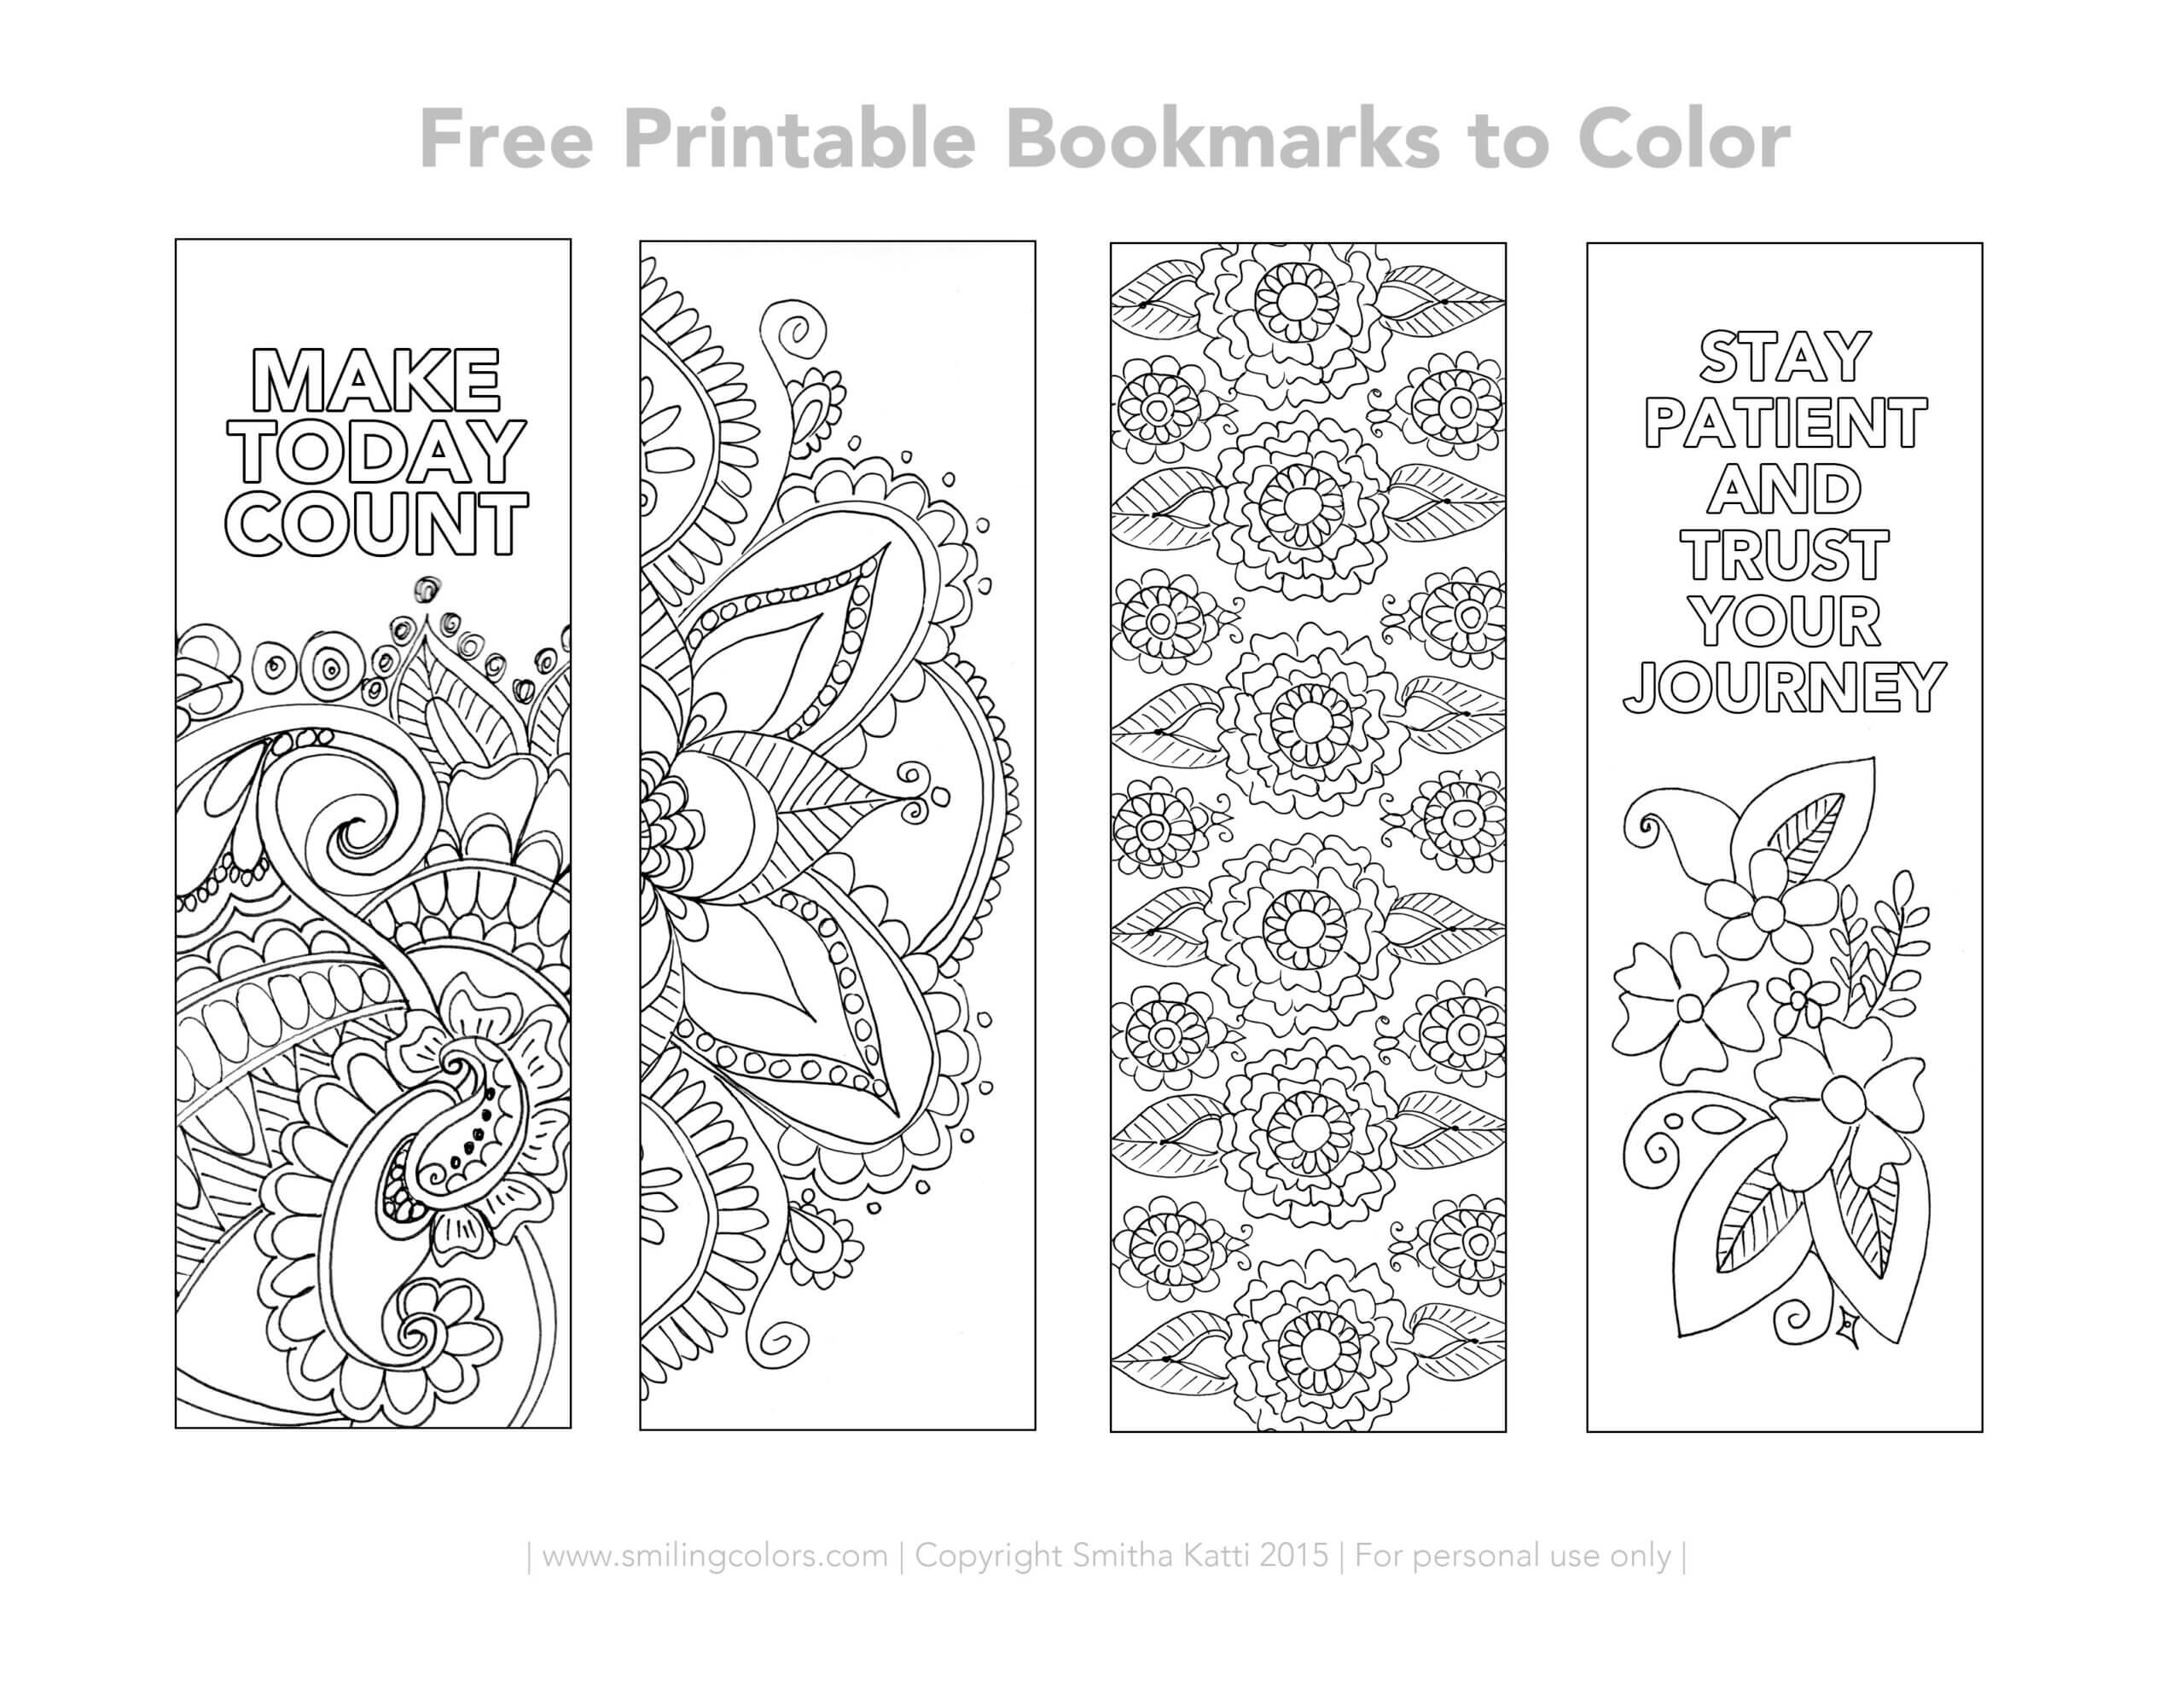 Free Printable Bookmarks To Color | Free Printable Bookmarks For Free Blank Bookmark Templates To Print